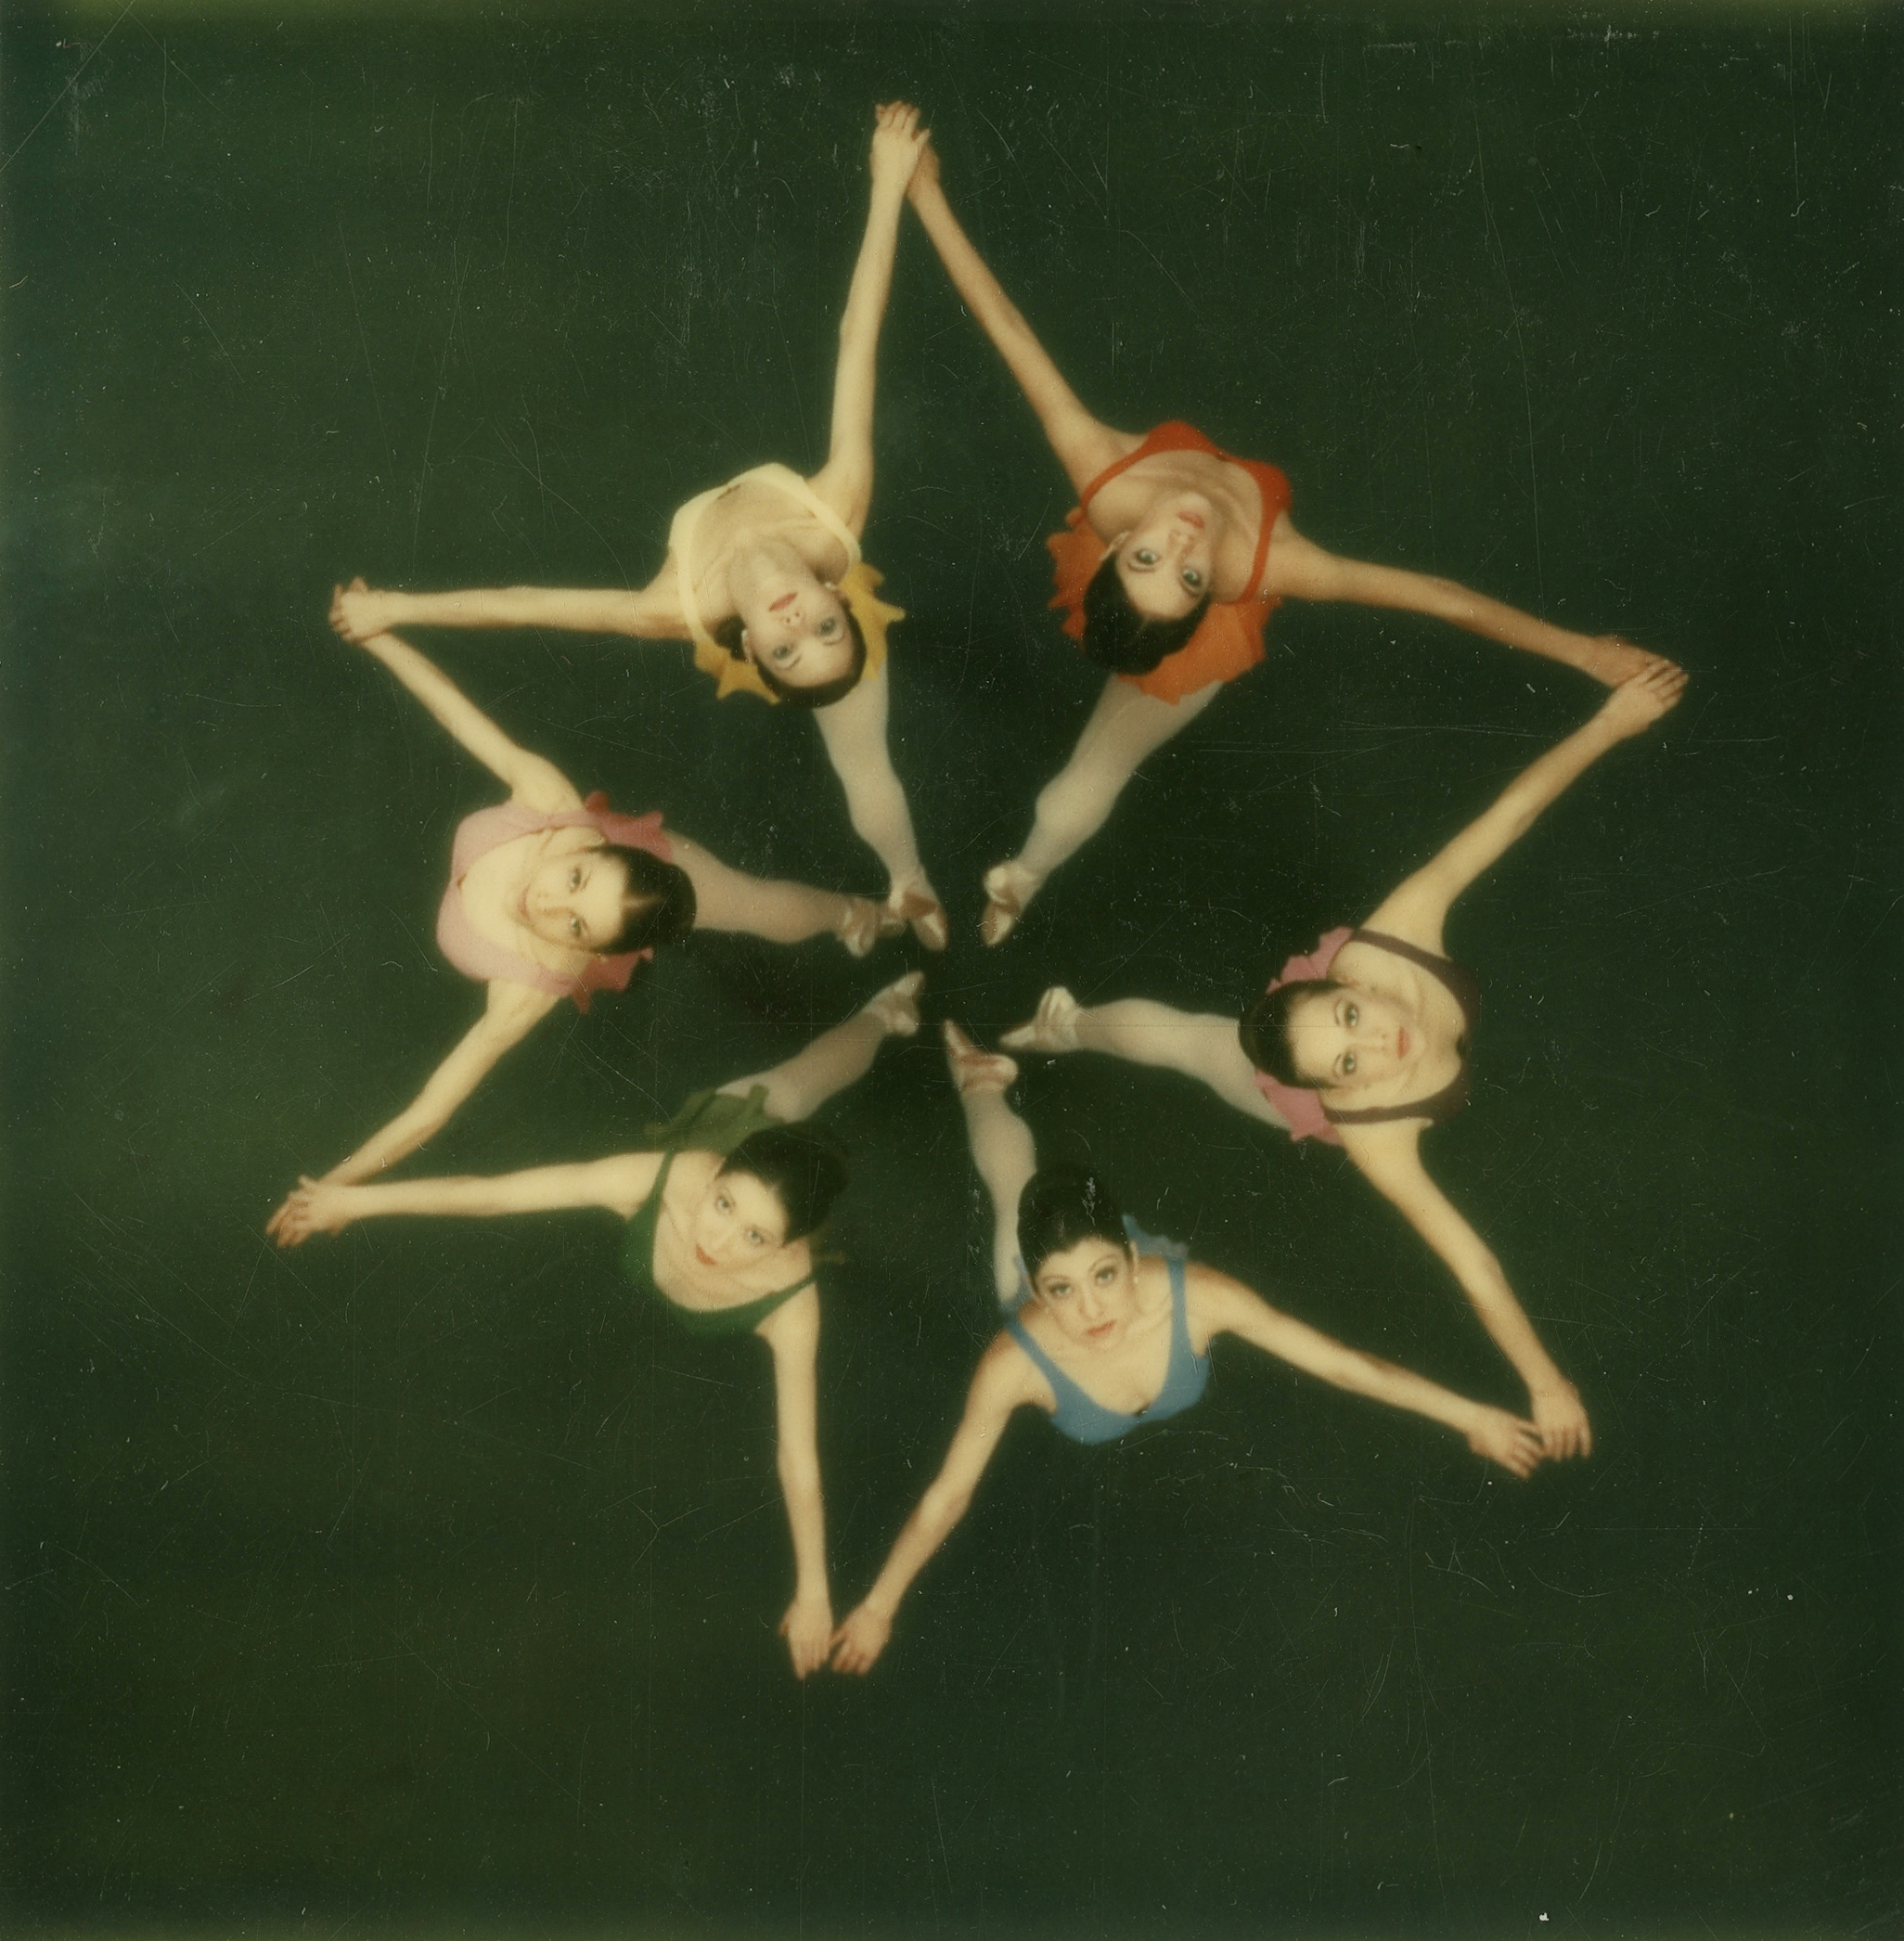 Dancers photographed from above with a Polaroid SX-70 camera, 1972.